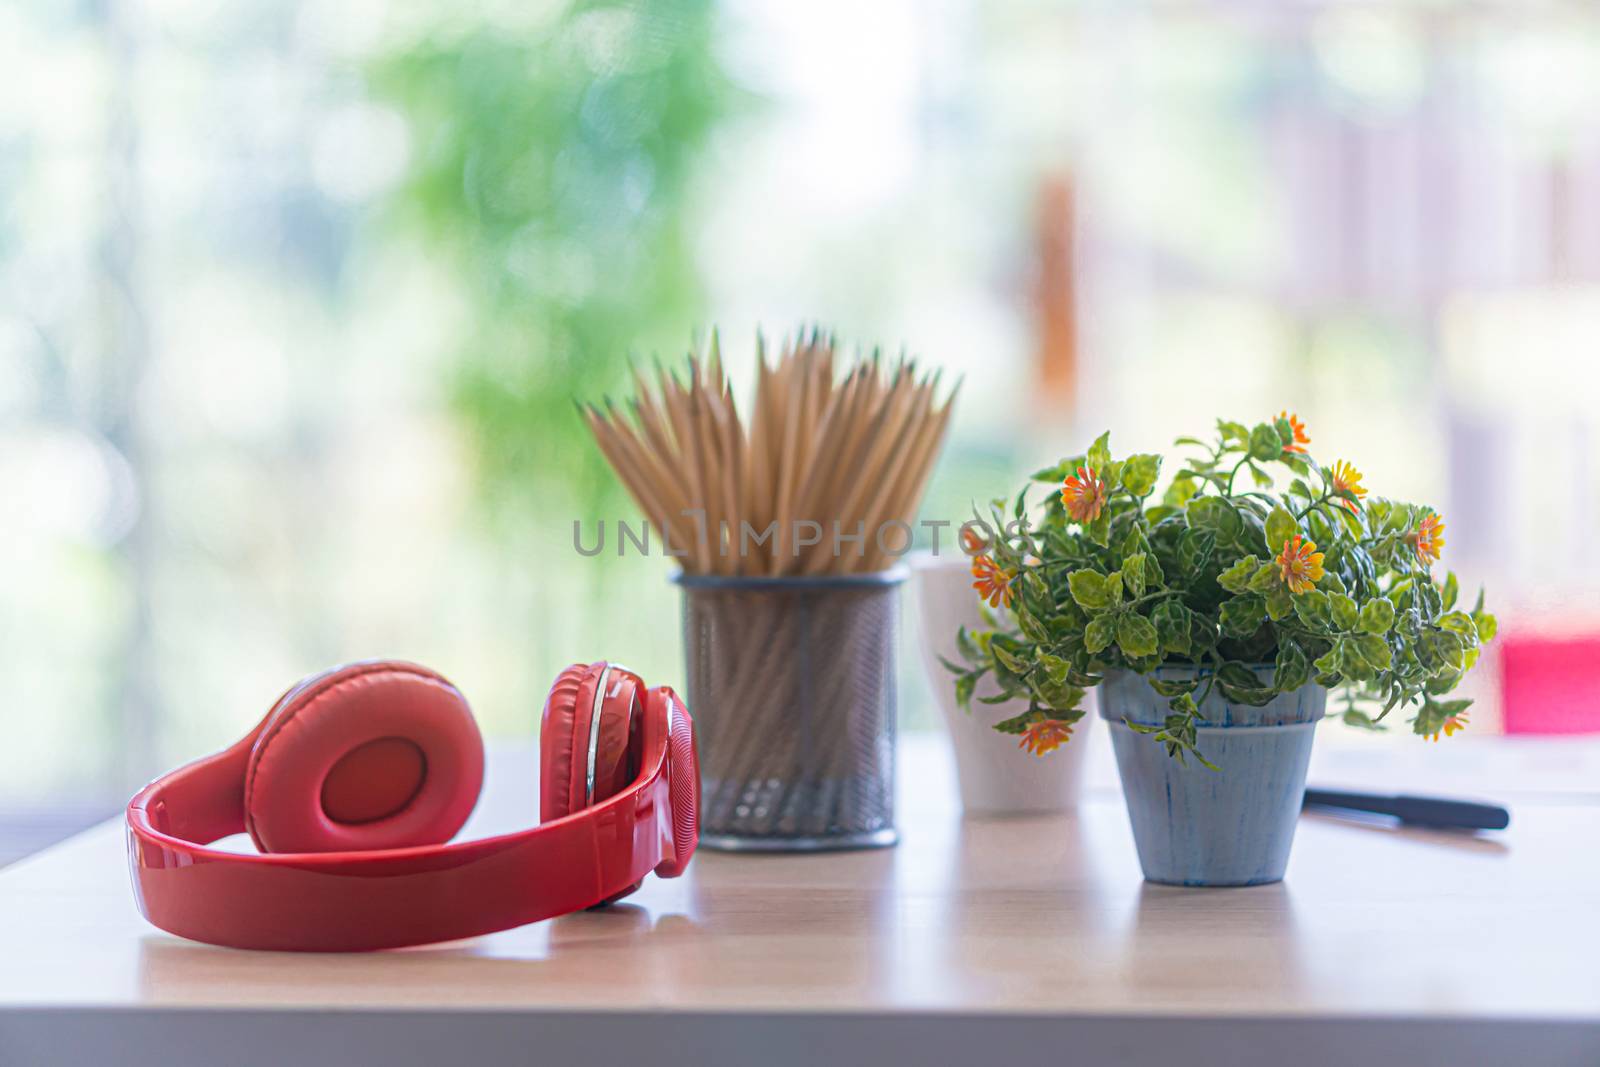 the red head phone and pencil case on white table by sandyman